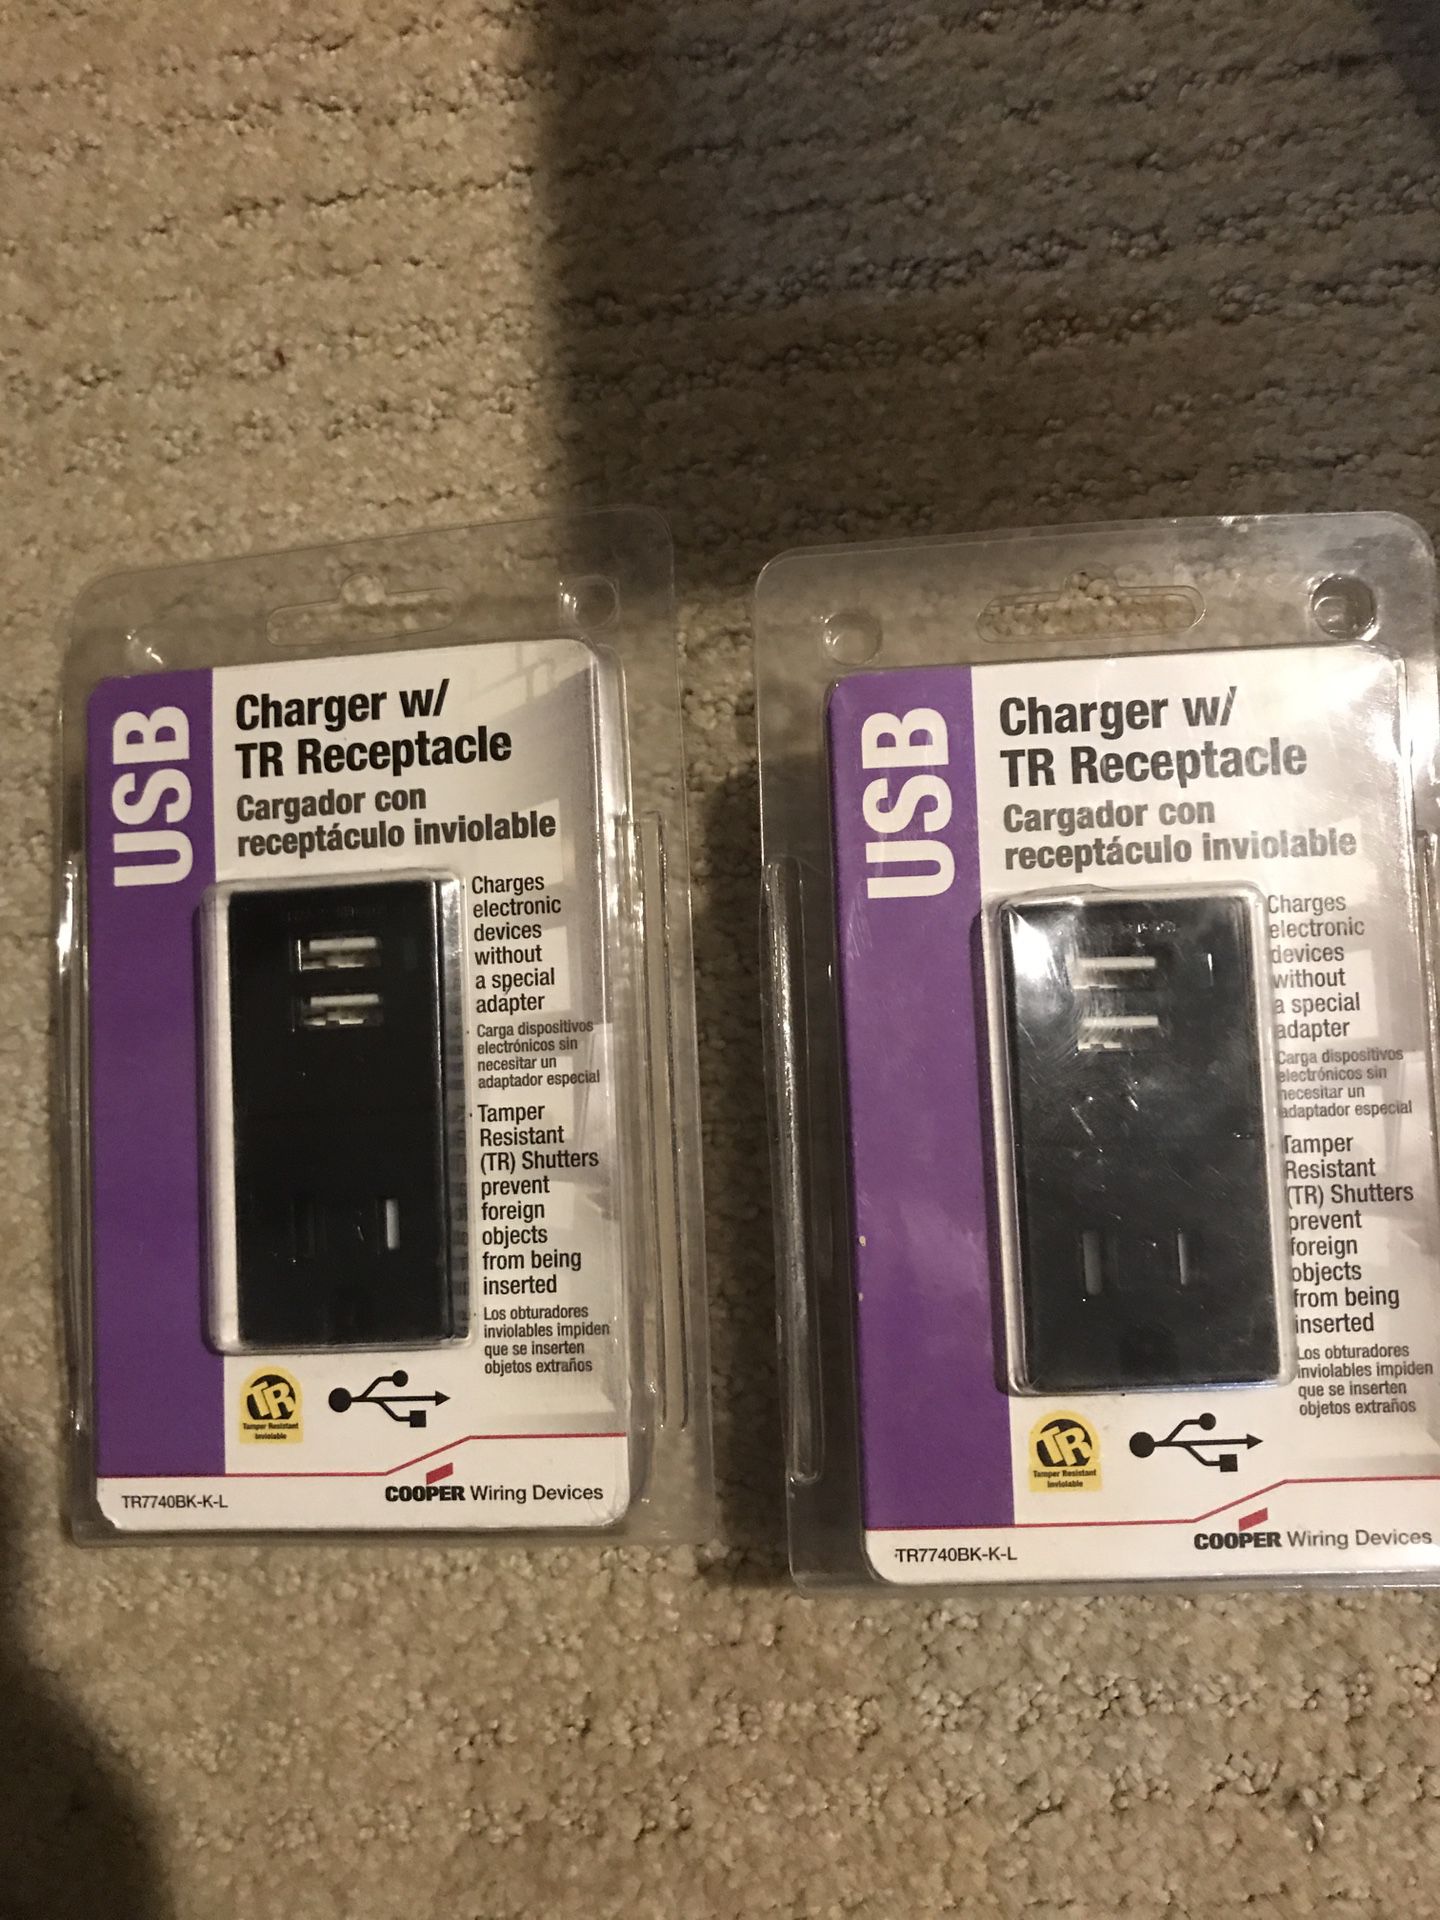 USB Charger w/ TR receptacle lot of 2